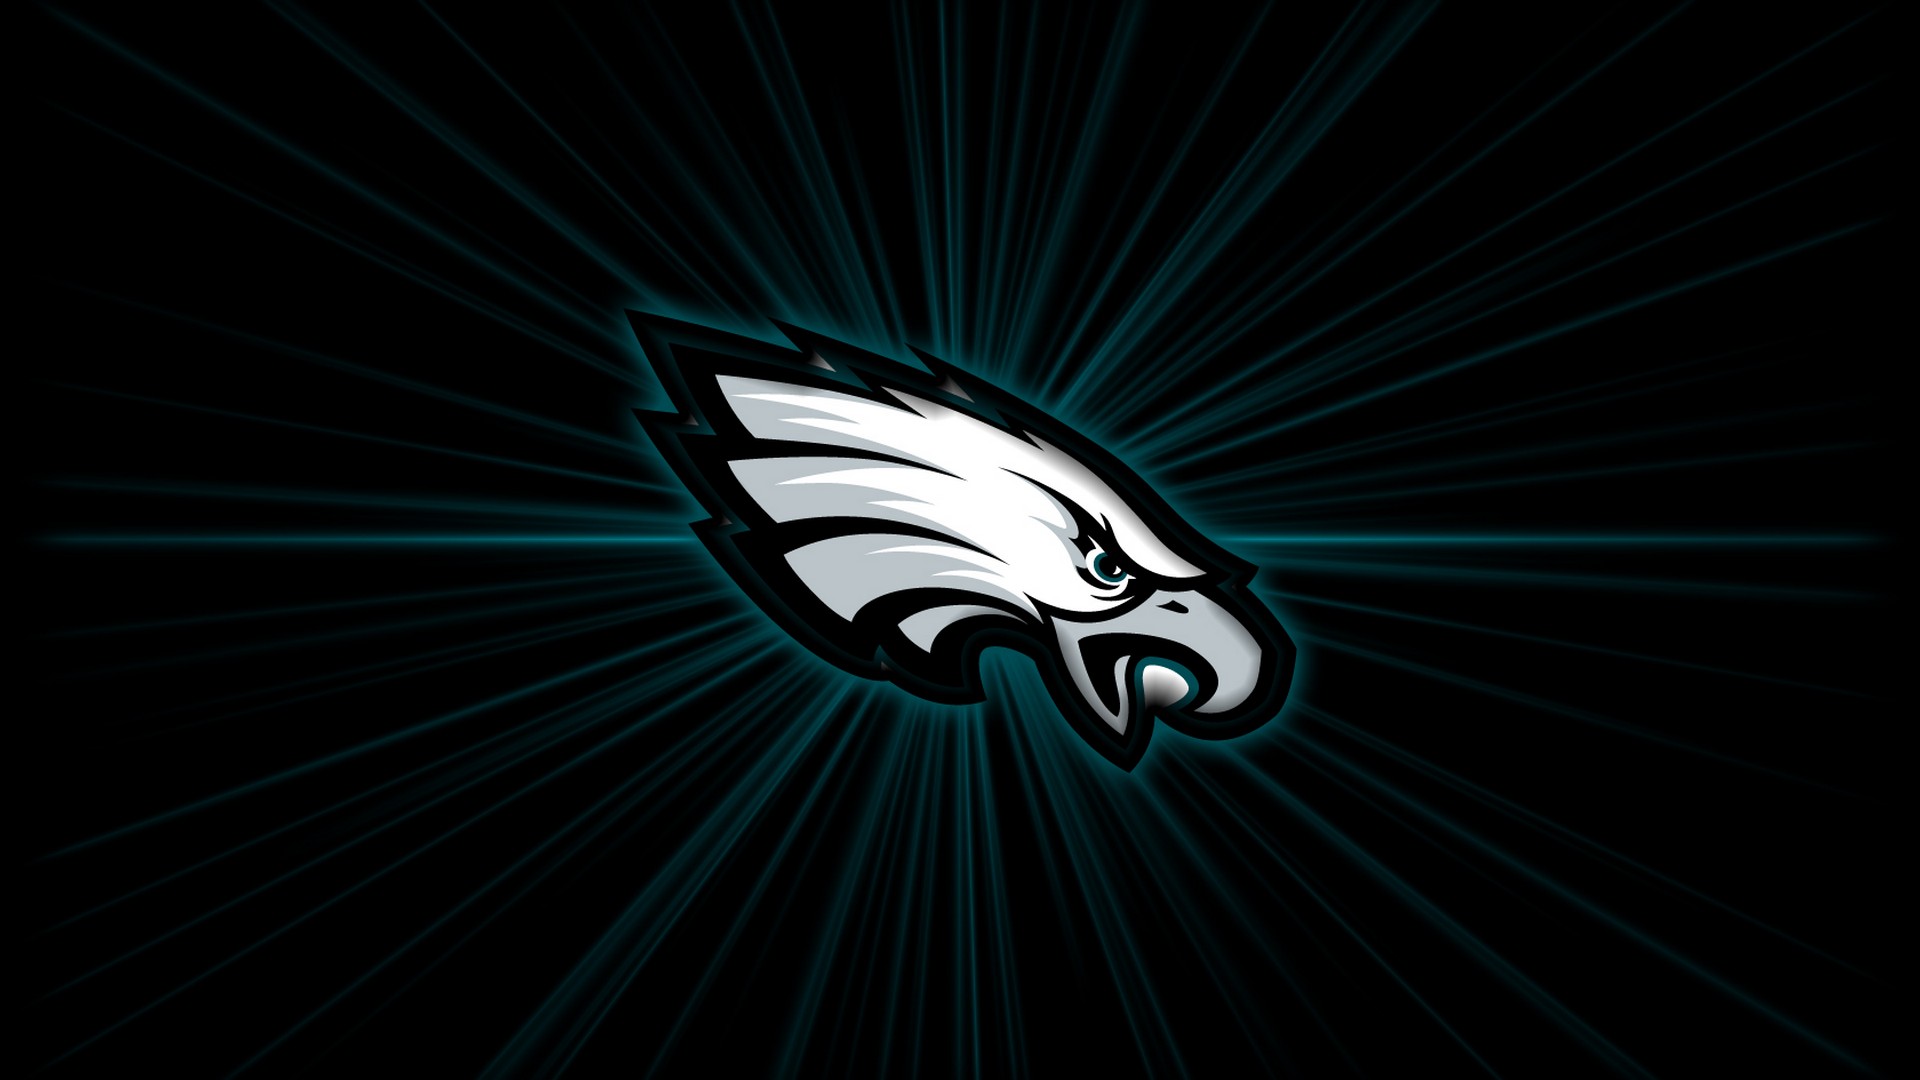 Wallpaper Desktop Philadelphia Eagles HD With Resolution 1920X1080 pixel. You can make this wallpaper for your Mac or Windows Desktop Background, iPhone, Android or Tablet and another Smartphone device for free